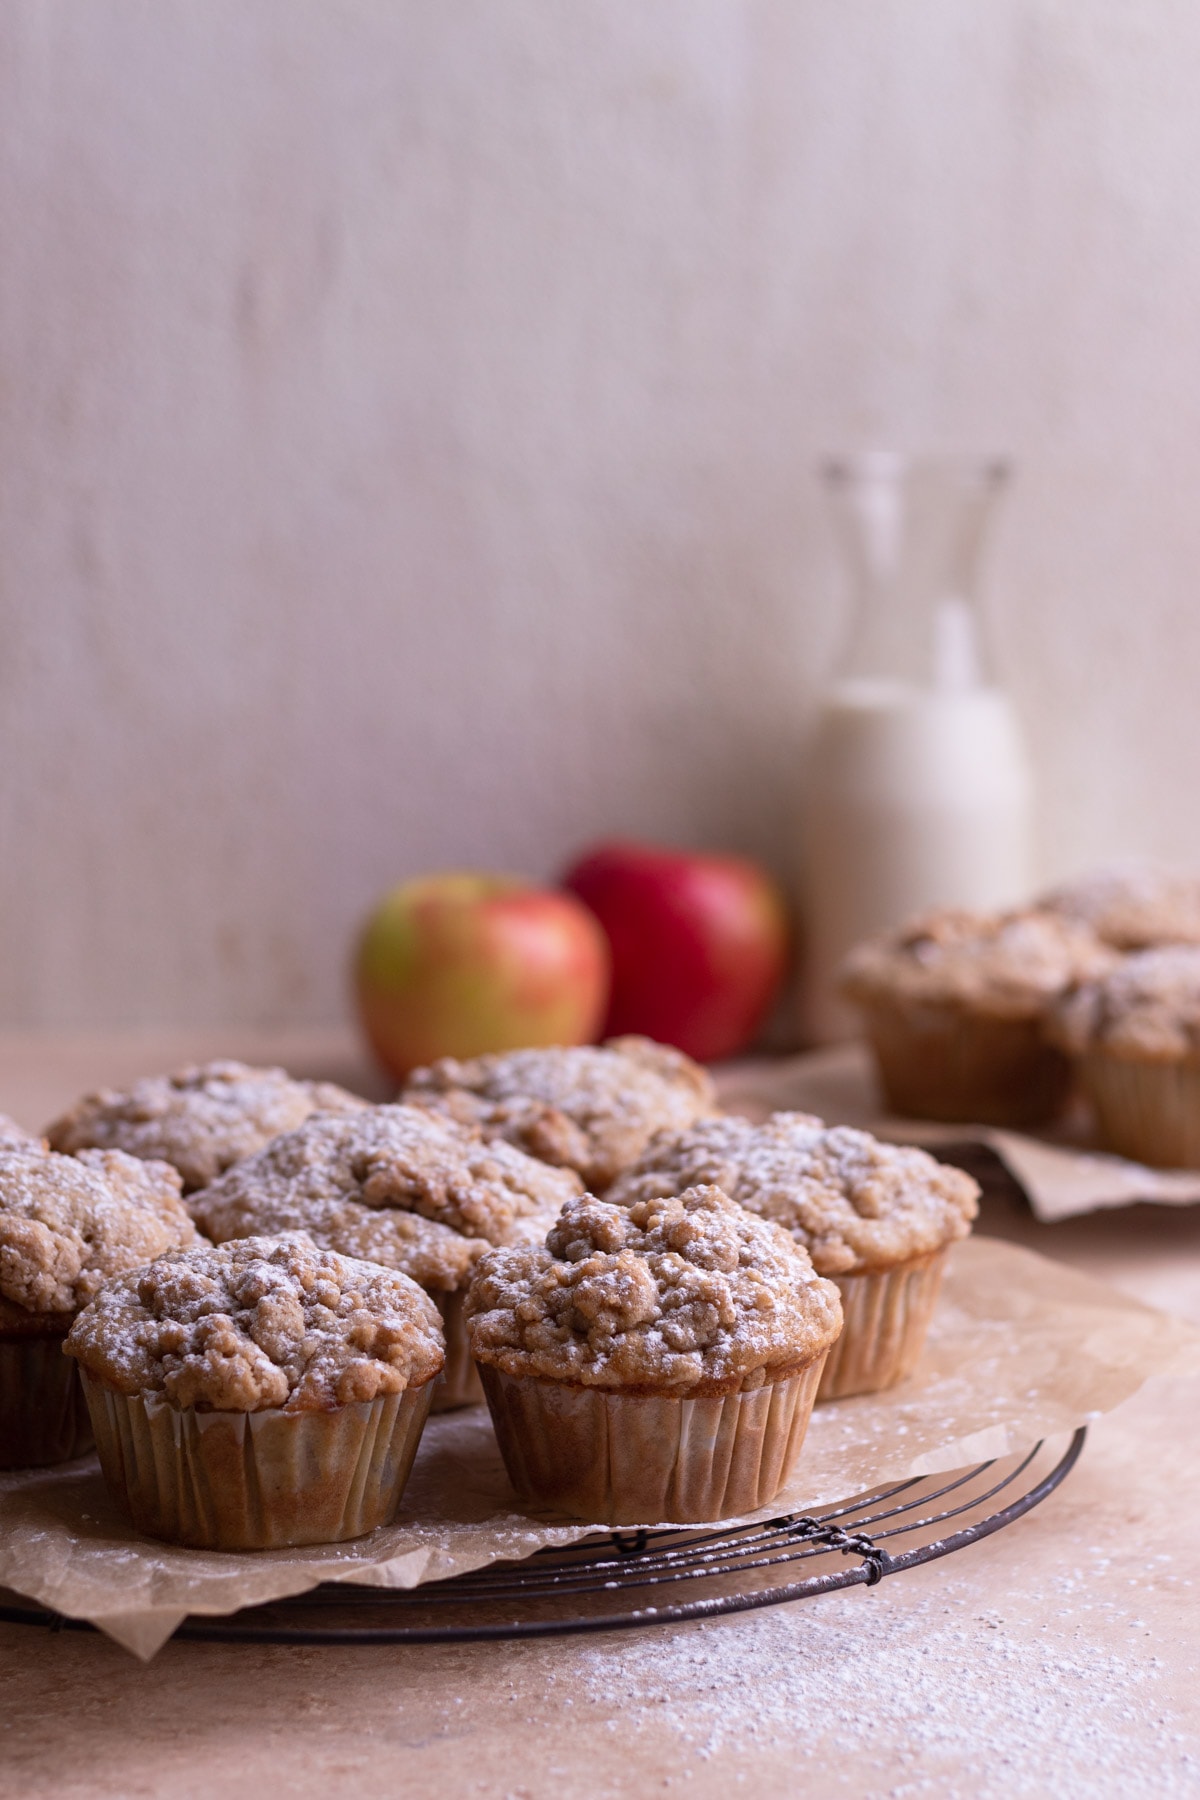 Crumble Muffins on parchment on a wire rack with more muffins, milk and apples in the background.